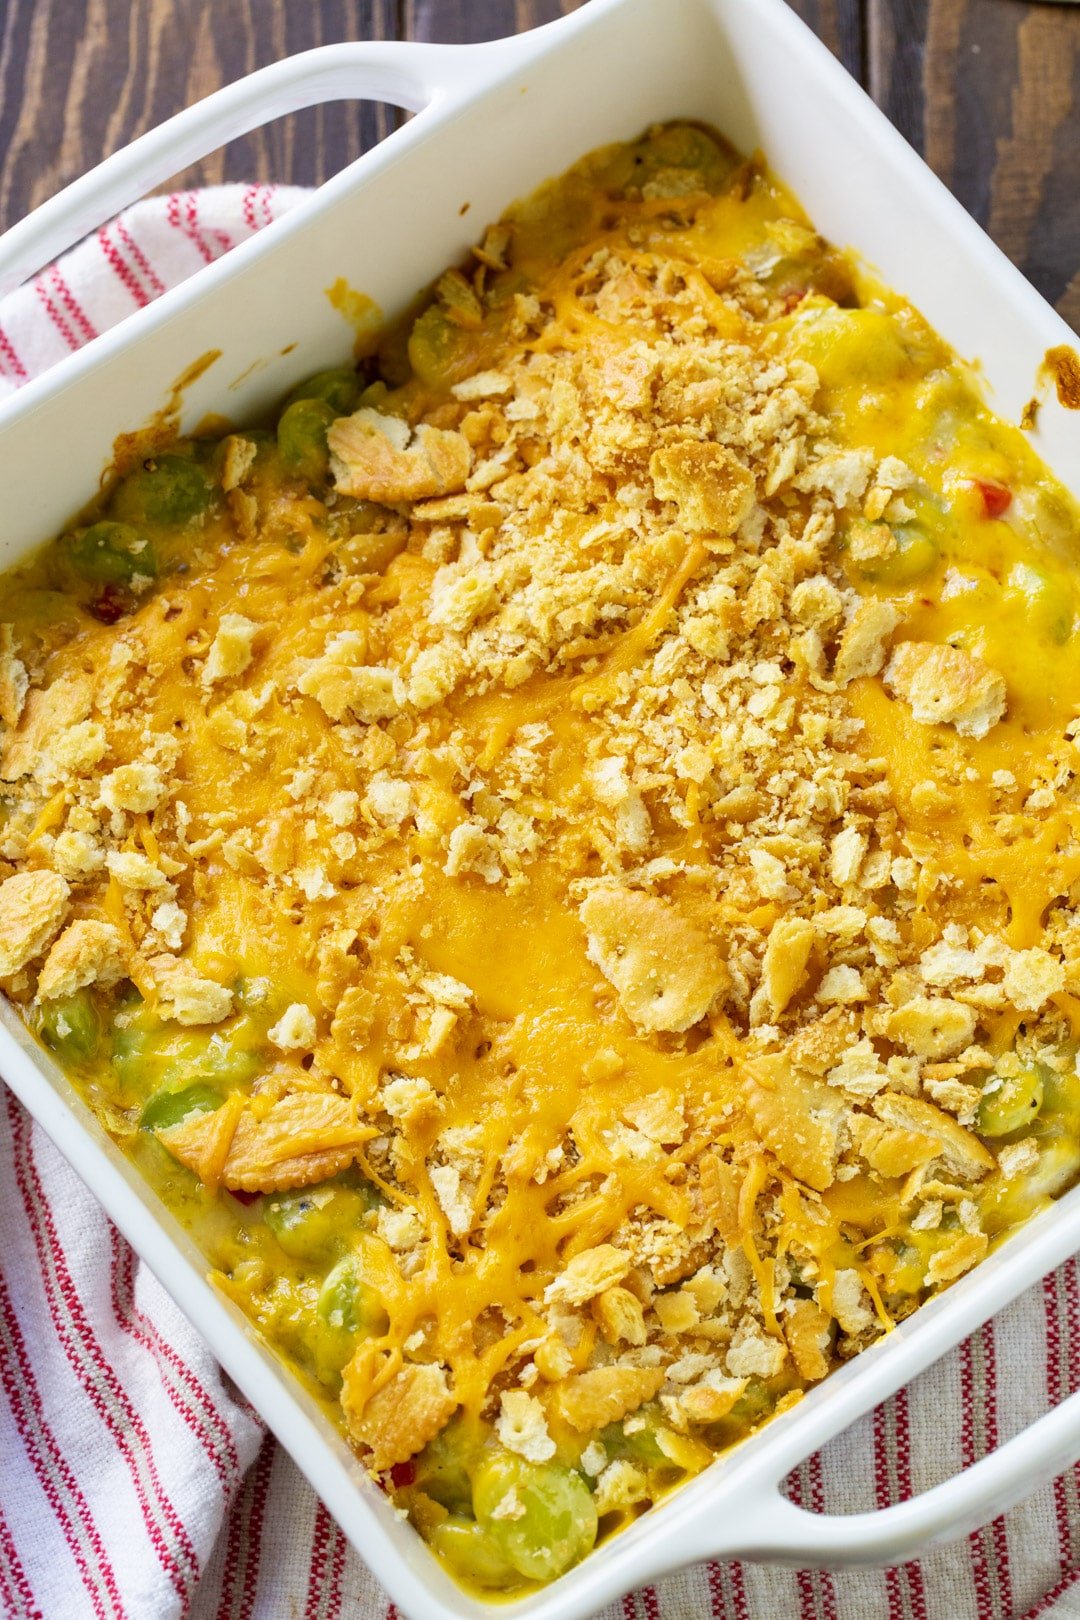 Lima Bean Casserole topped with cheddar cheese and crushed Ritz cracker topping.